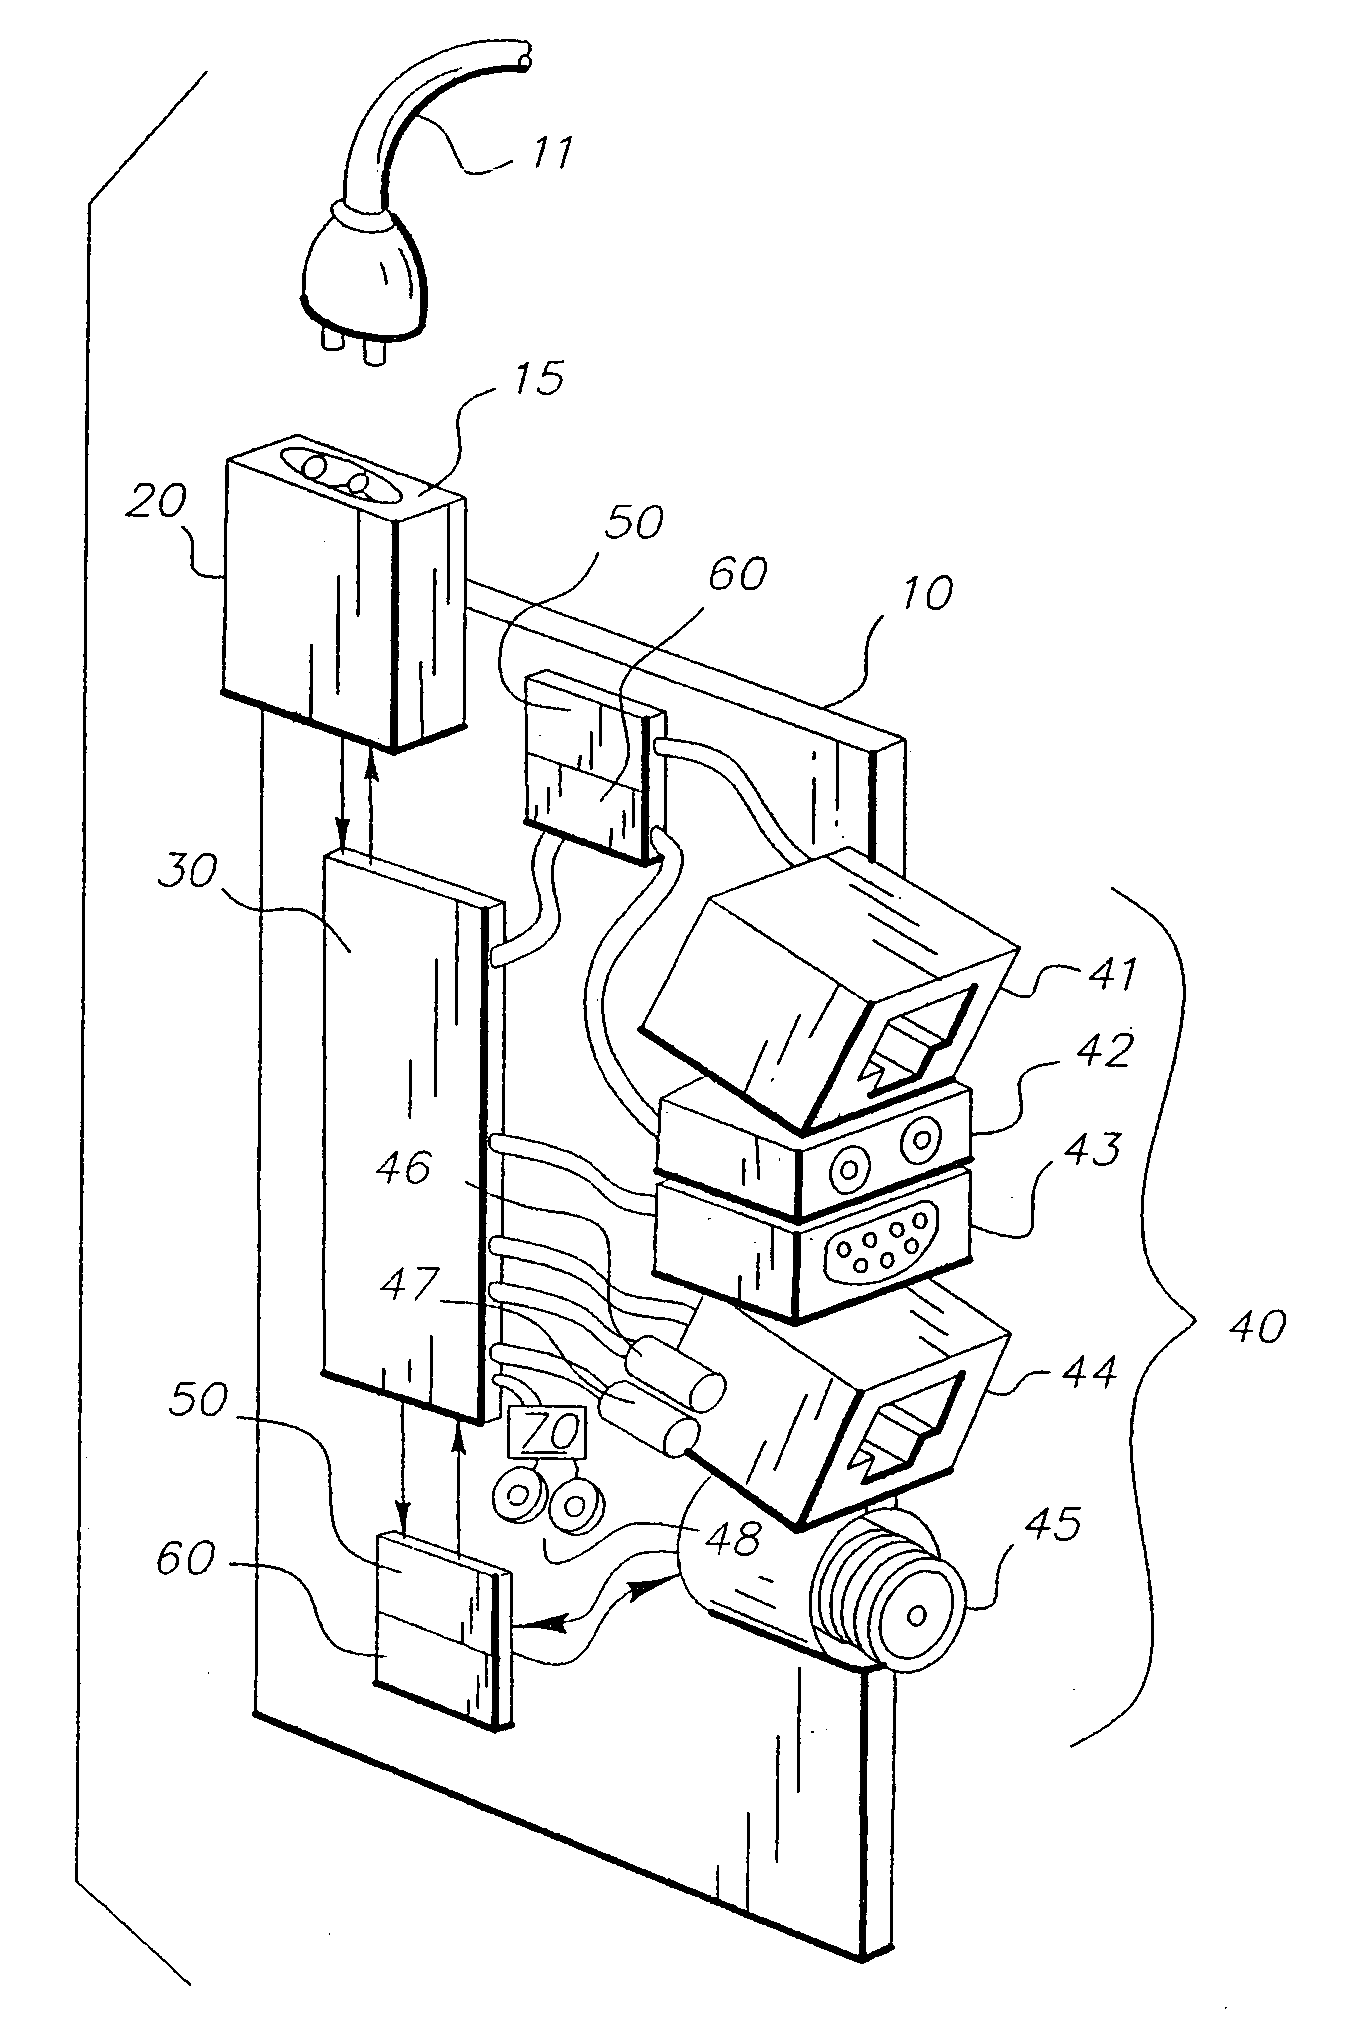 Wireless device connection in single medium wiring scheme for multiple signal distribution in building and access port therefor